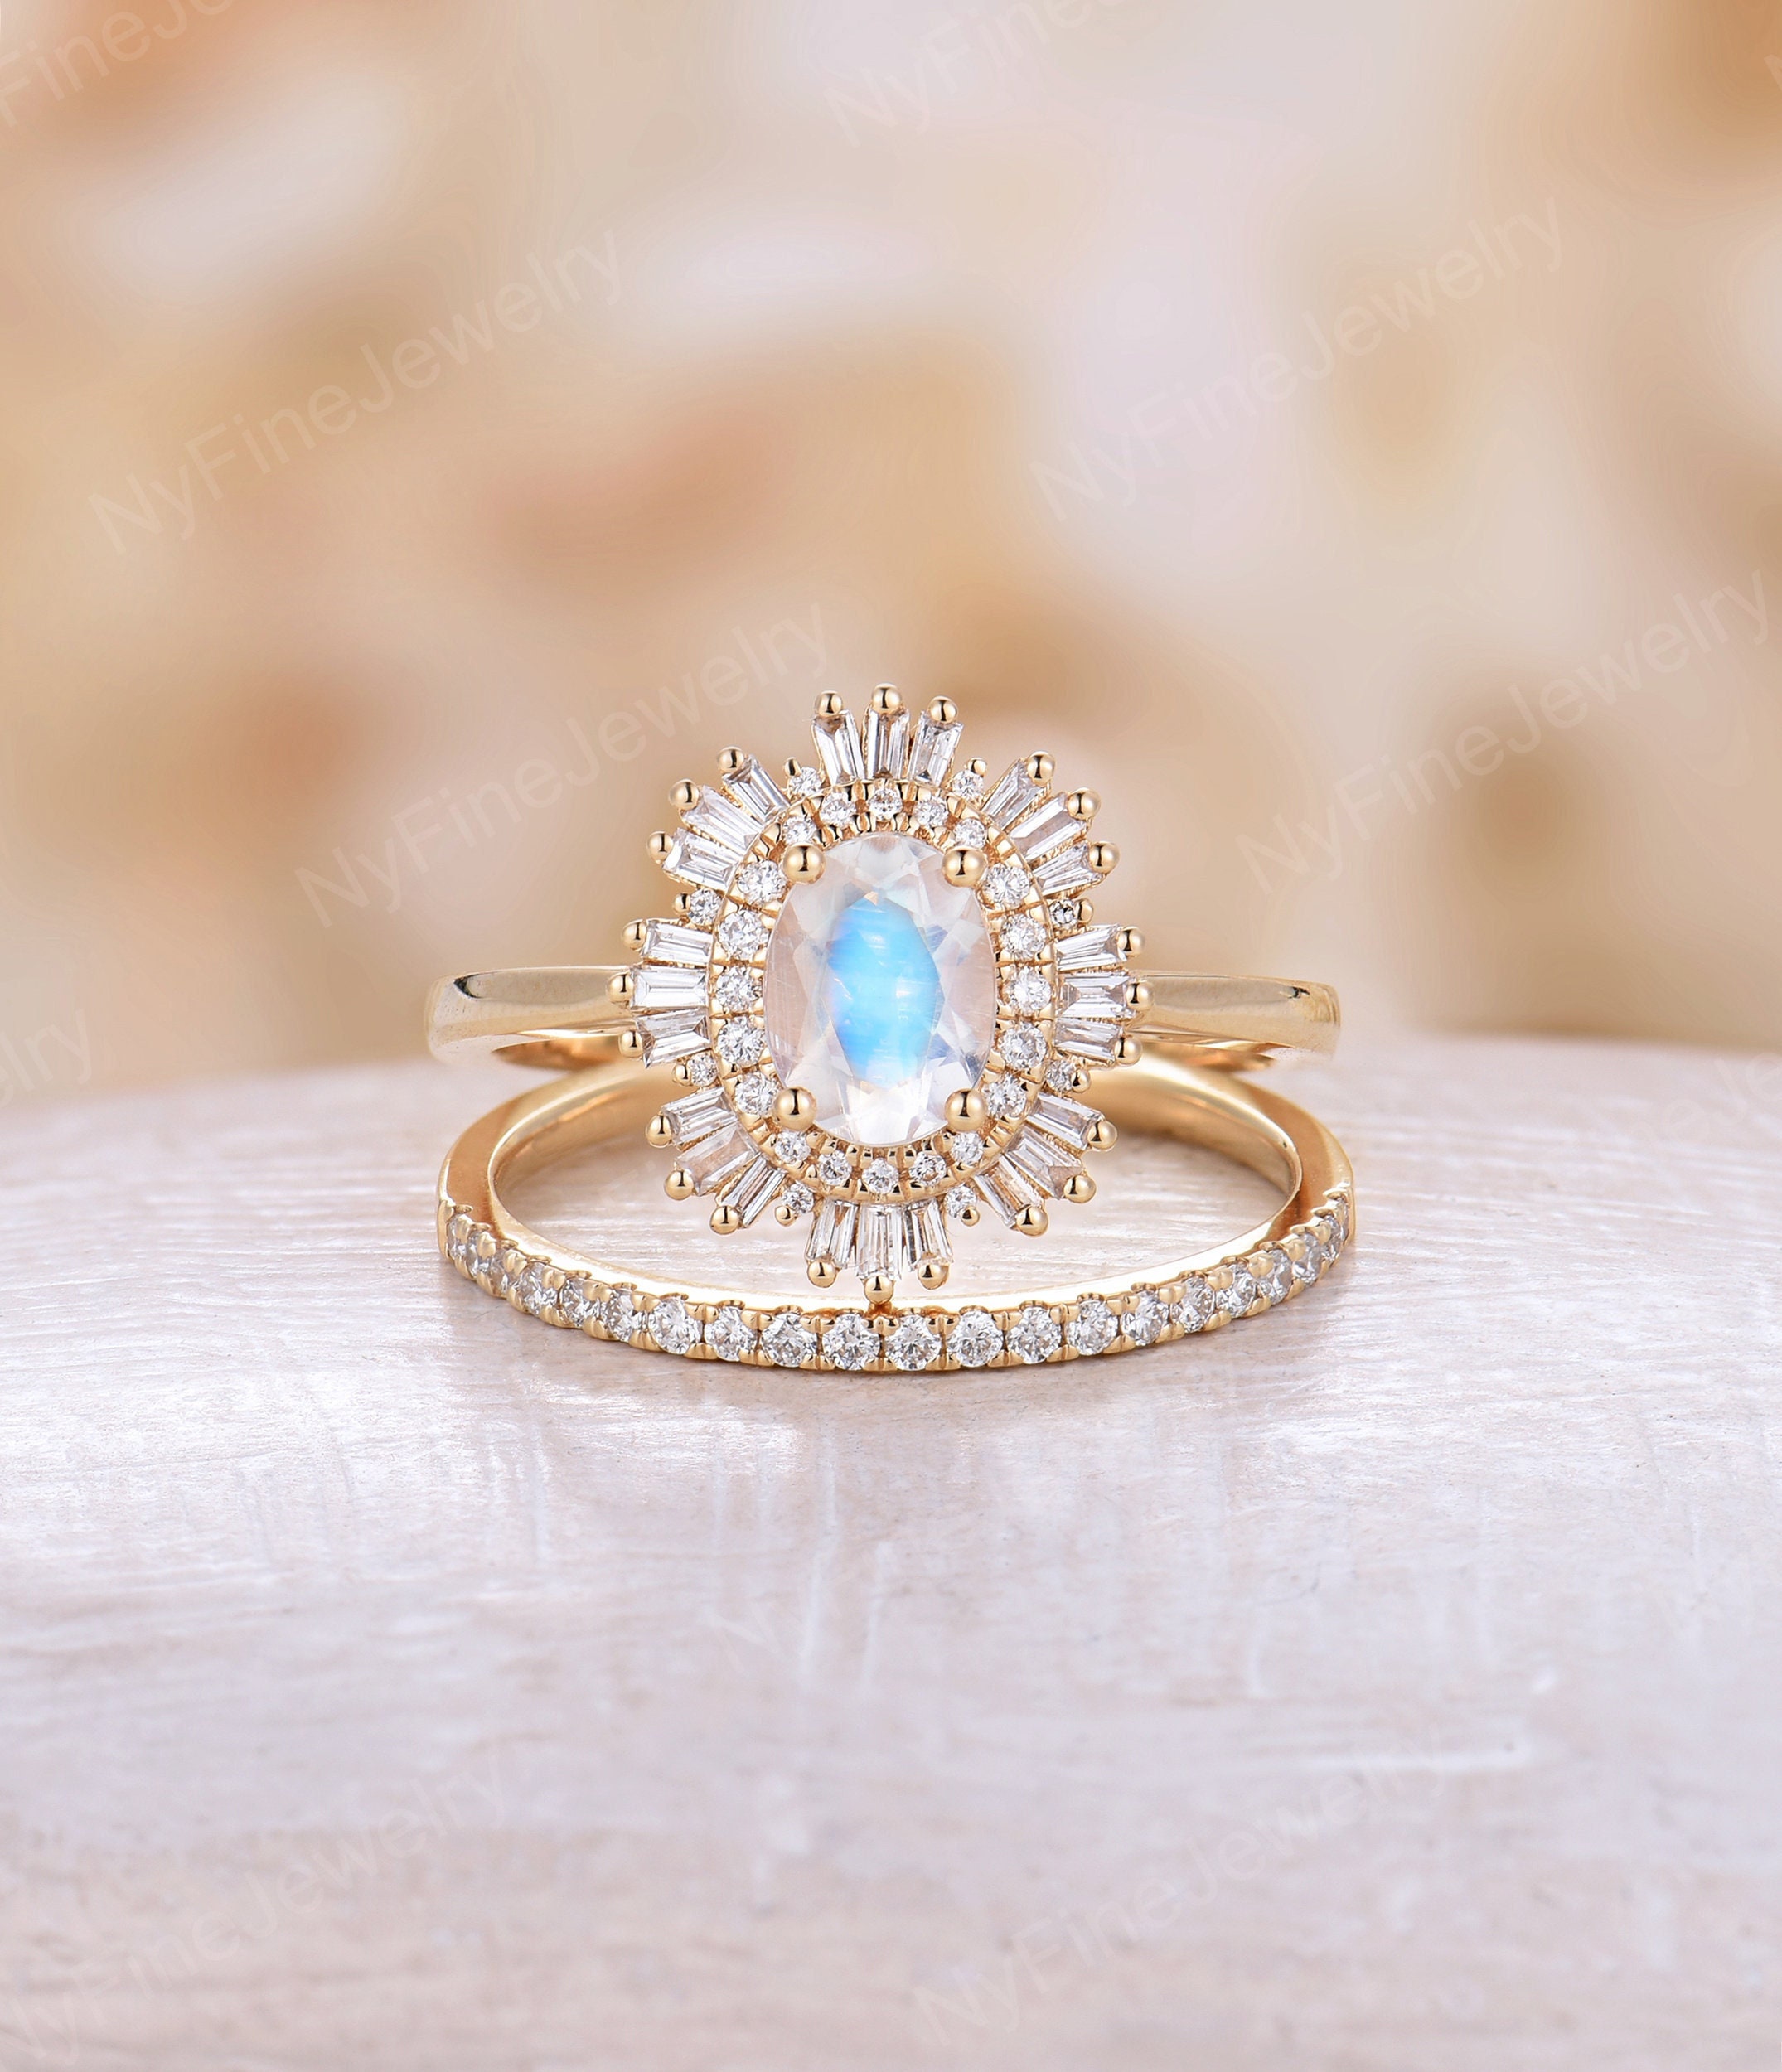 Moonstone Ring Anniversary Promise Ring Antique Oval cut Bridal ring Art deco Halo Ring Vintage Moonstone Engagement Ring